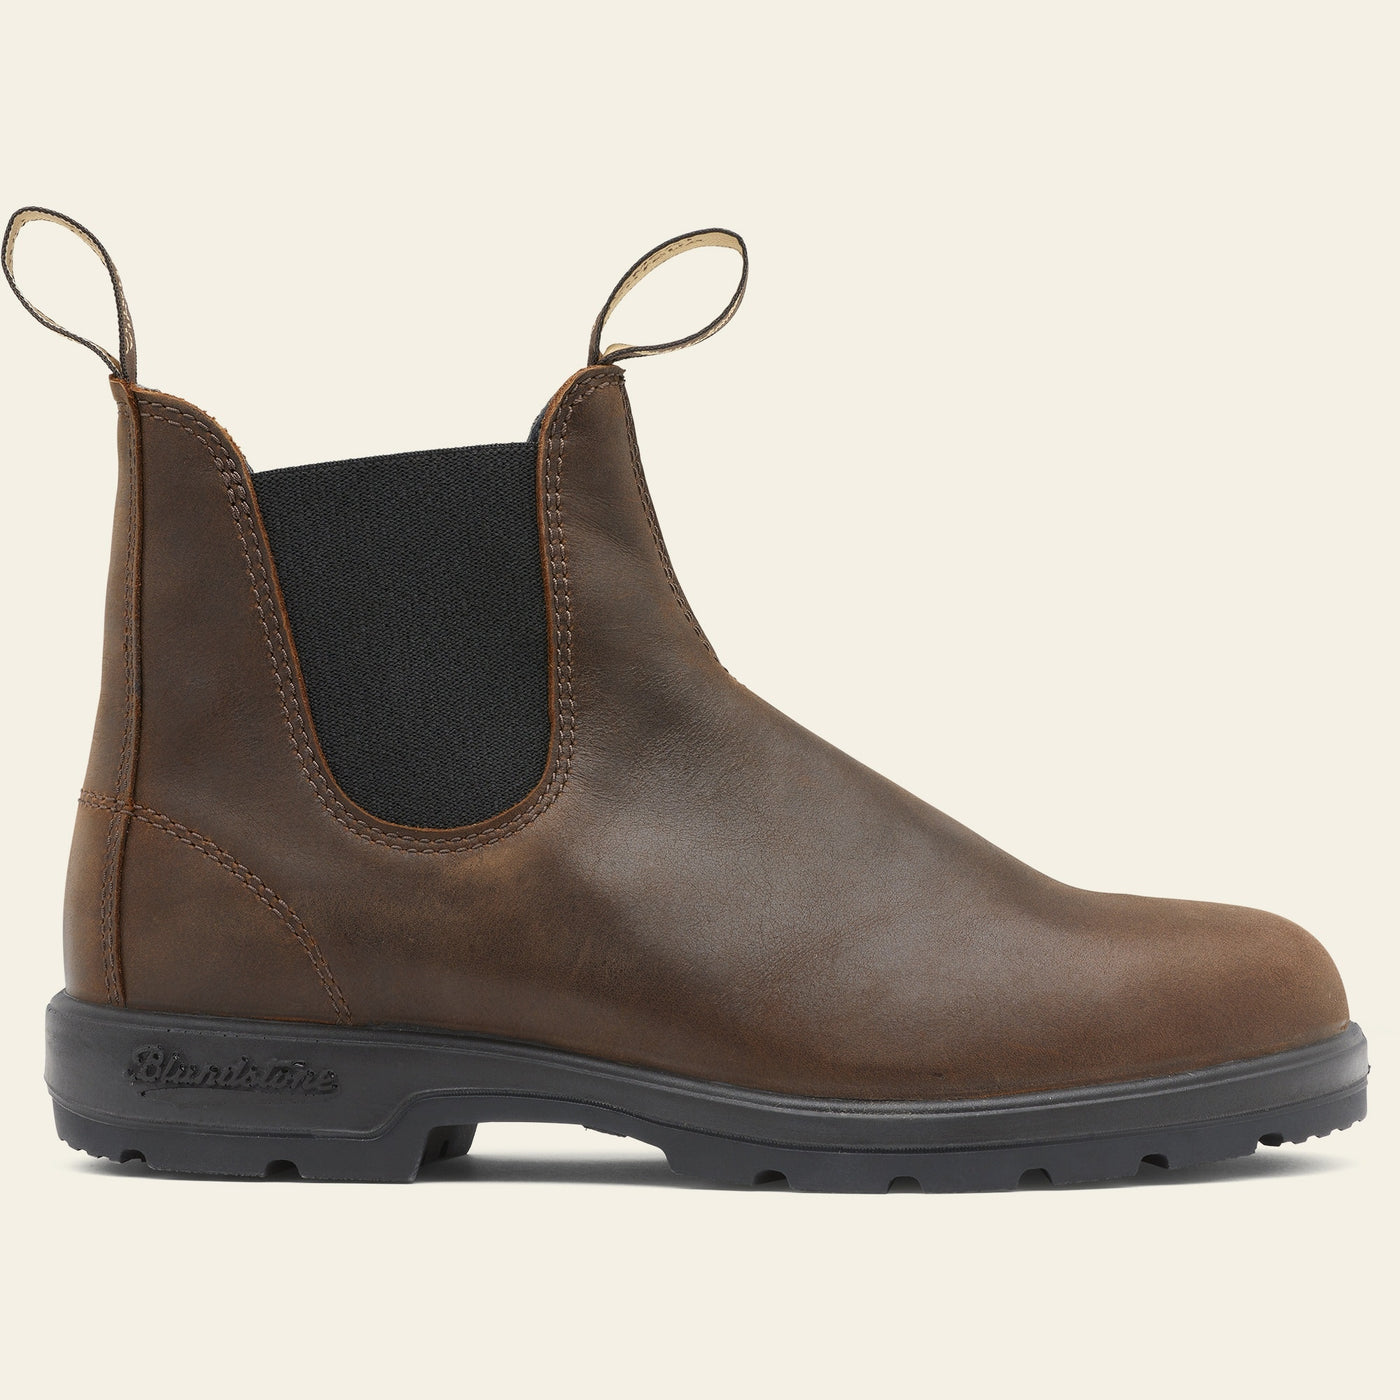 Blundstone - 1609 Chelsea Boot, Leather Lined - Antique Brown